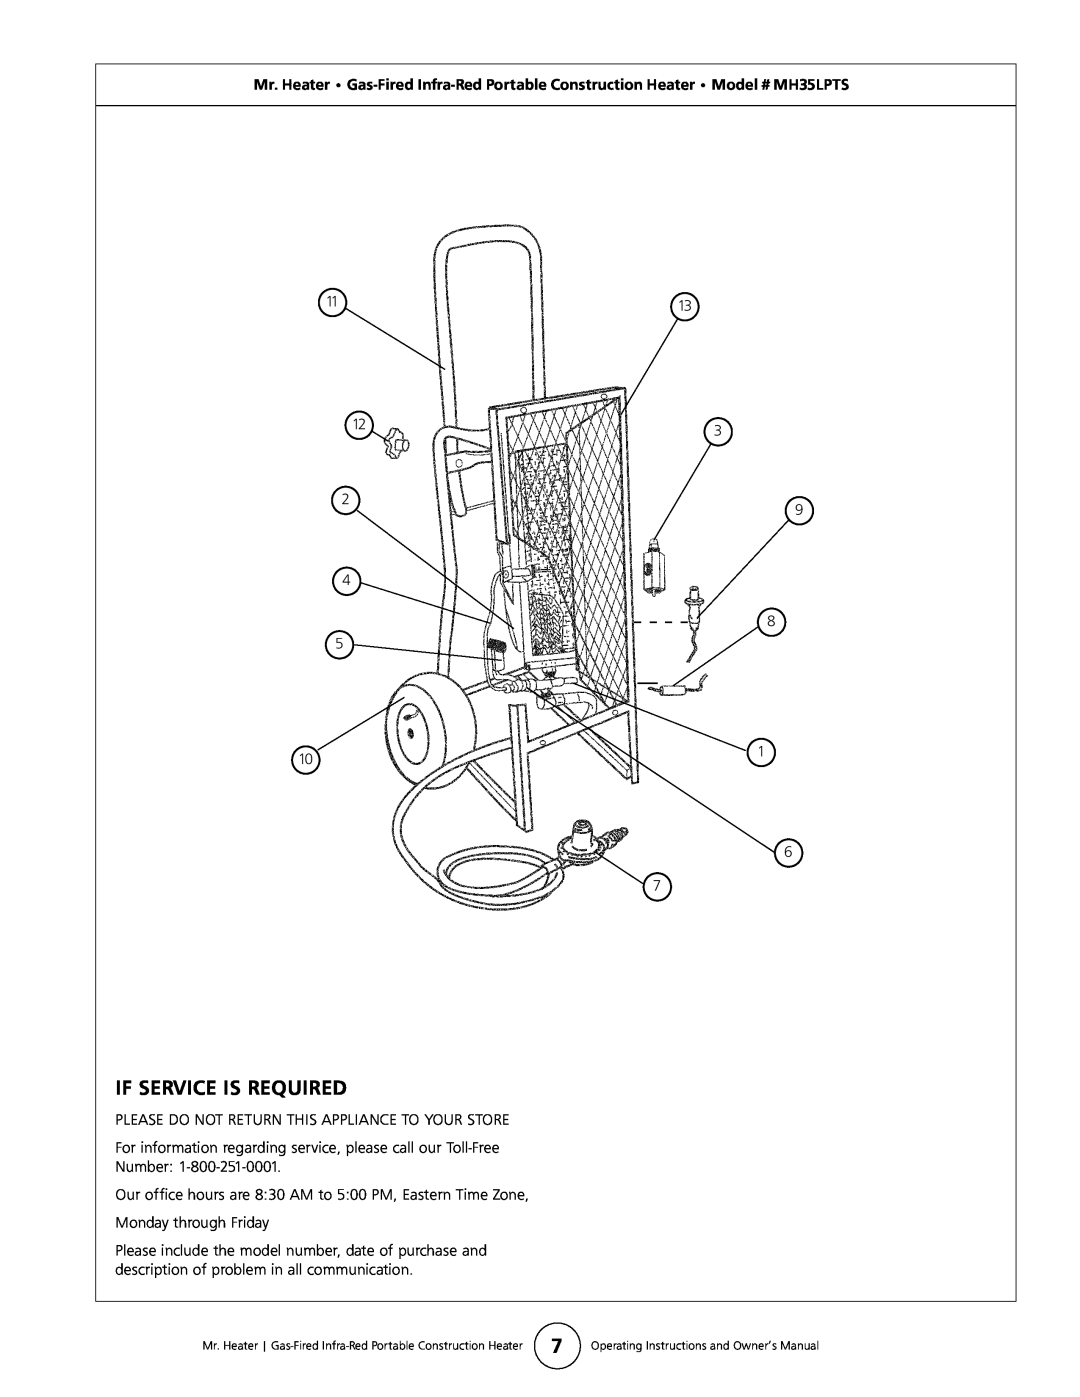 Mr. Heater MH35LPTS owner manual If Service Is Required 